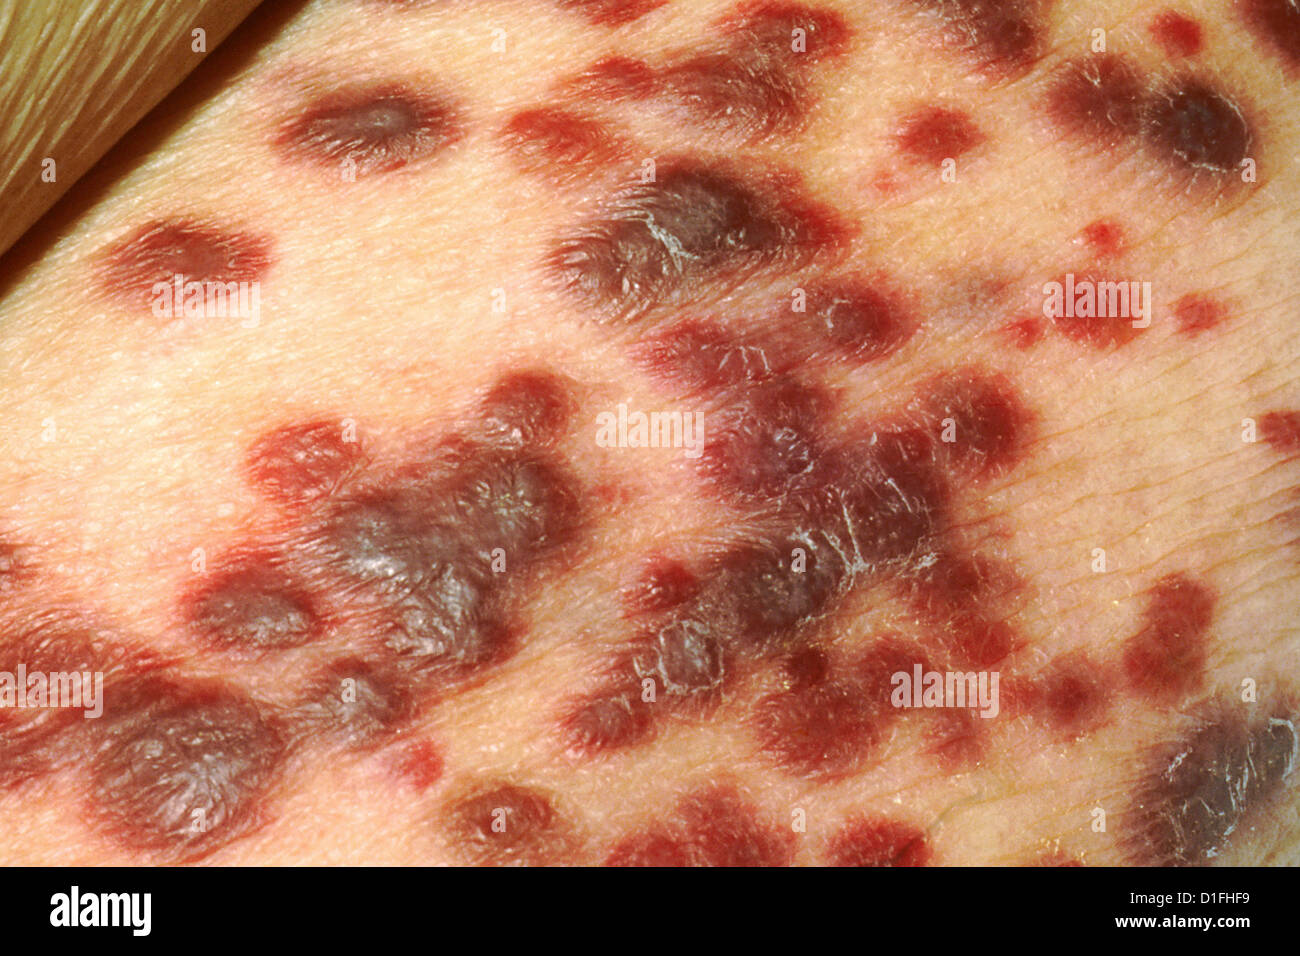 Kaposi's sarcoma on the skin of an AIDS patient. Stock Photo